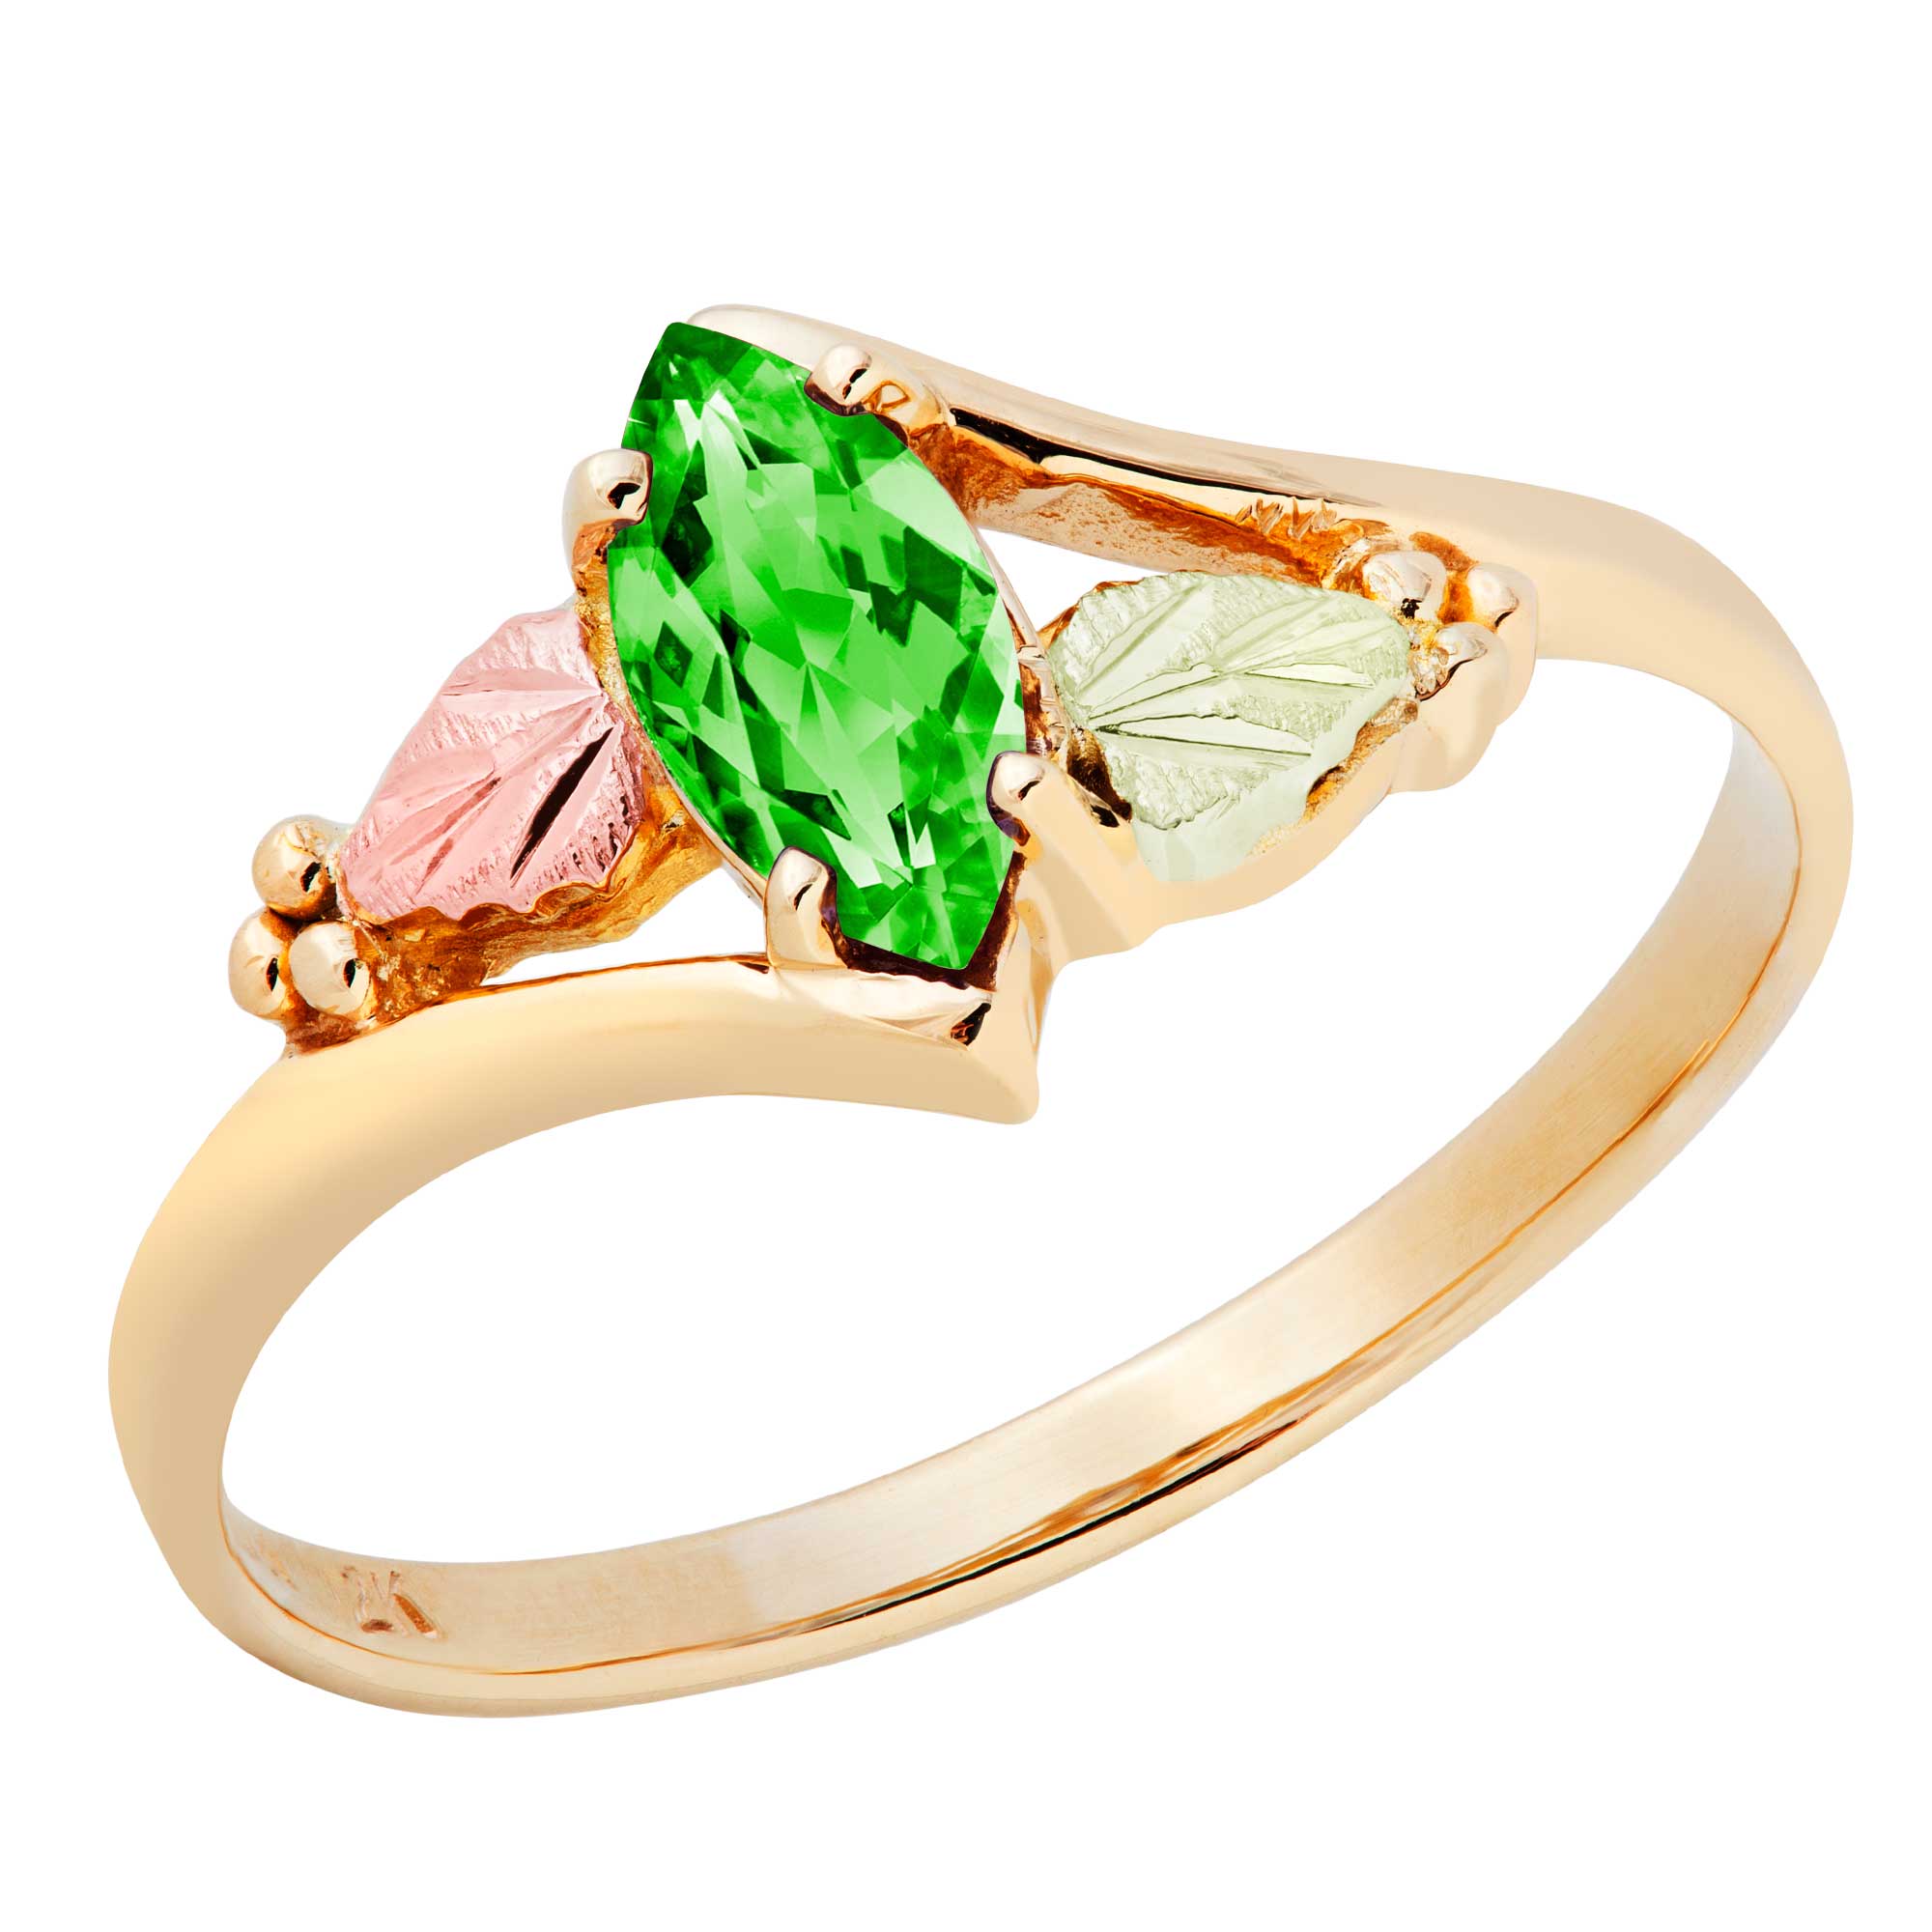 Created Soude Emerald Marquise May Birthstone Bypass Ring, Black Hills Gold motif. 